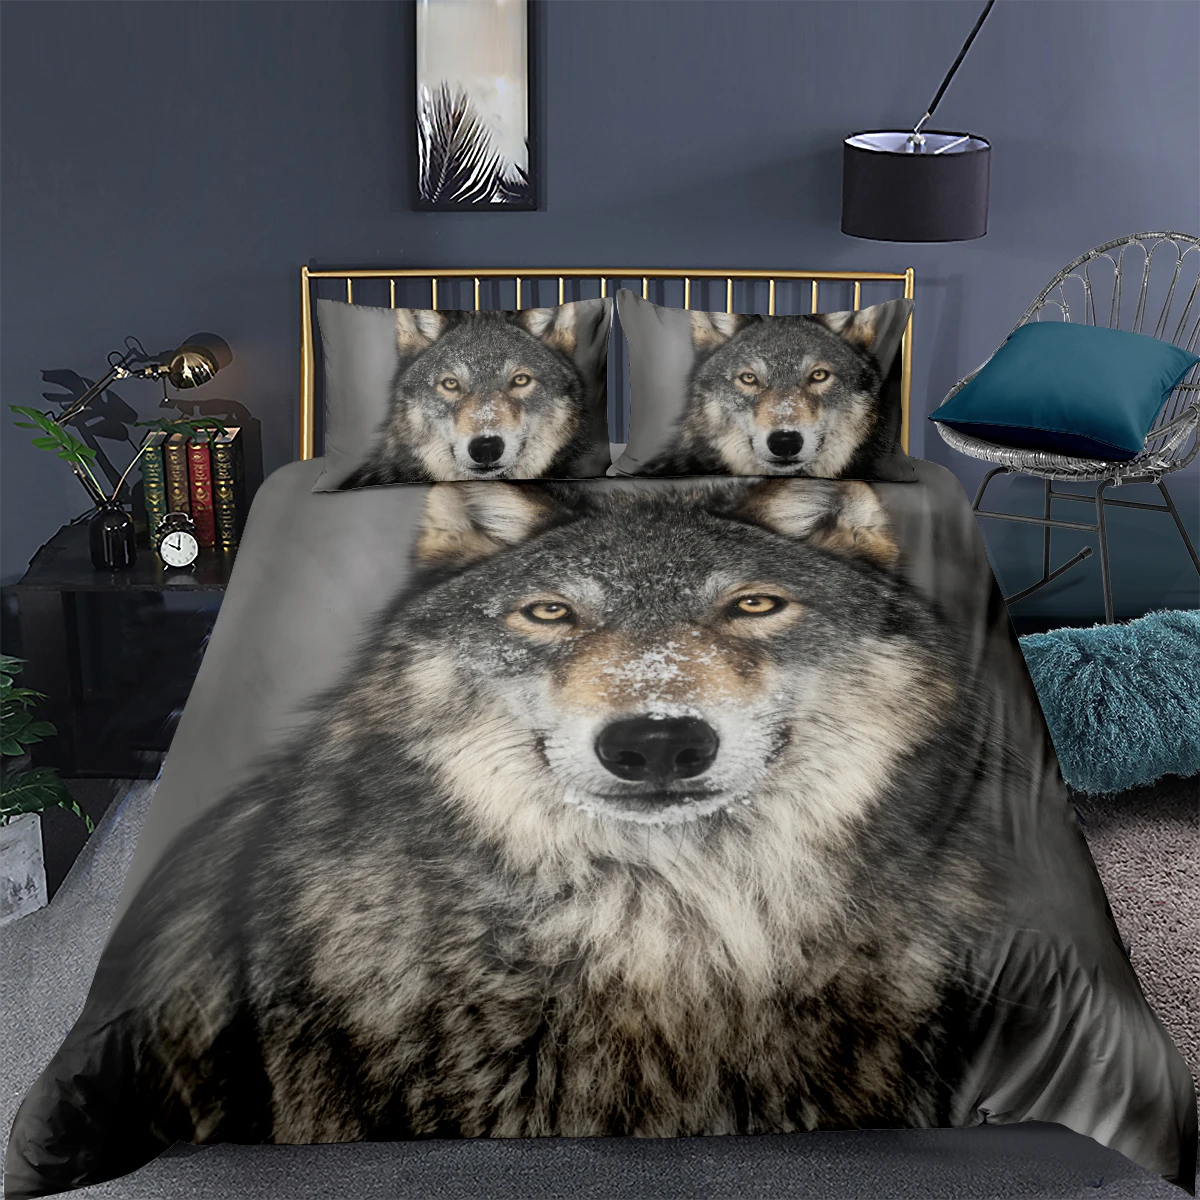 

3D Wolf Duvet Cover Sets Blue Comforter Cases Pillow Slips Full Double Single Twin Queen Size 140*210cm Animals Bedding Set